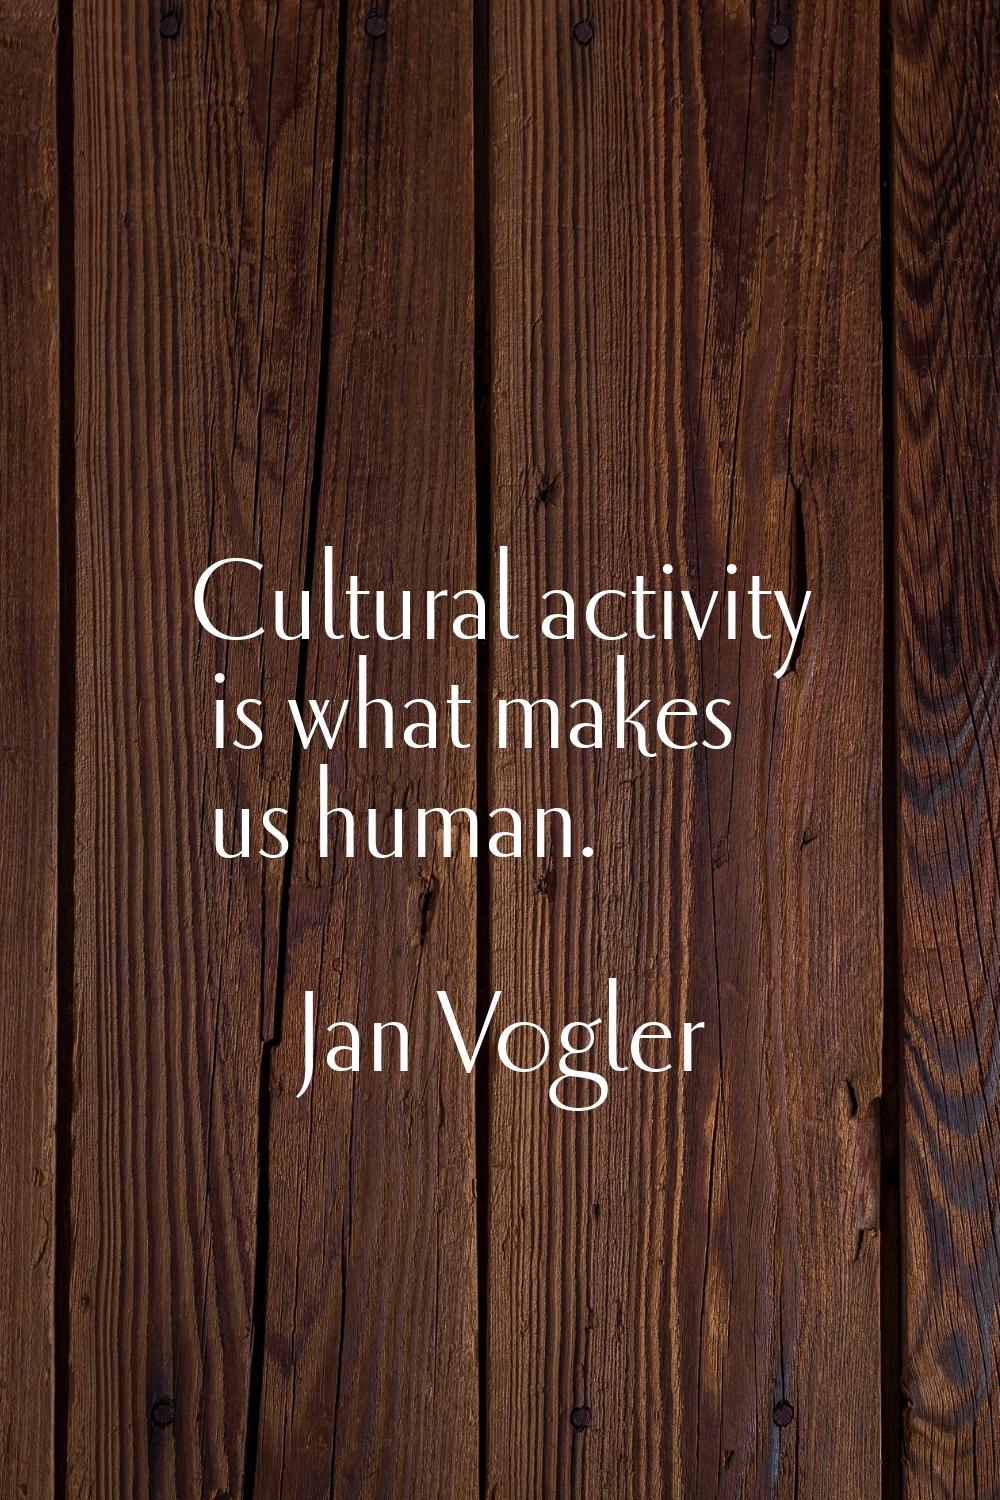 Cultural activity is what makes us human.